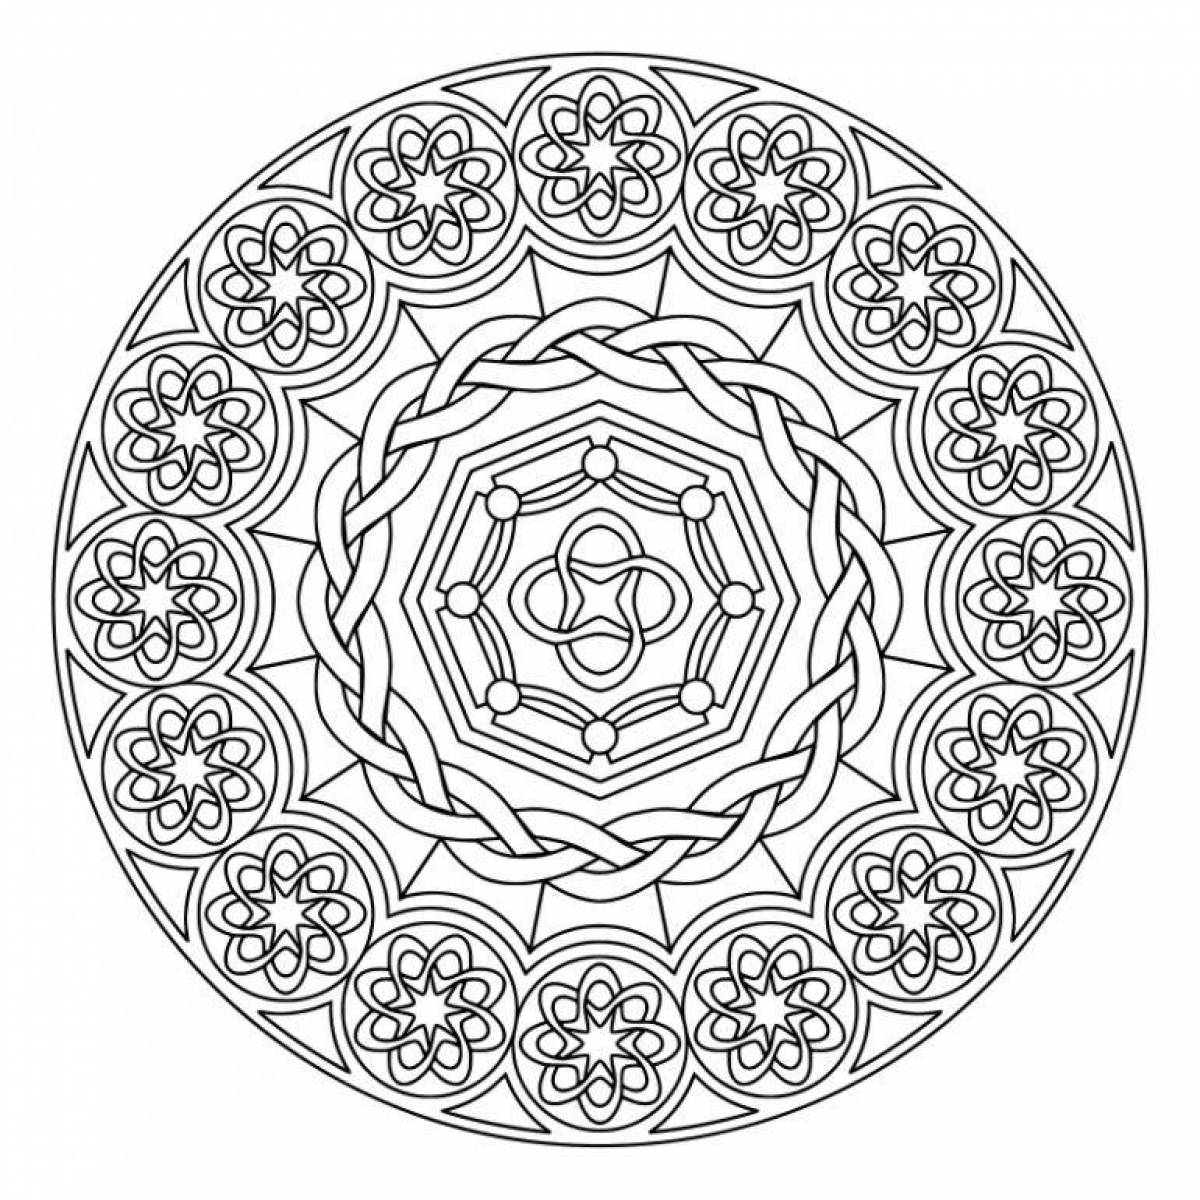 Uplifting mantra coloring pages